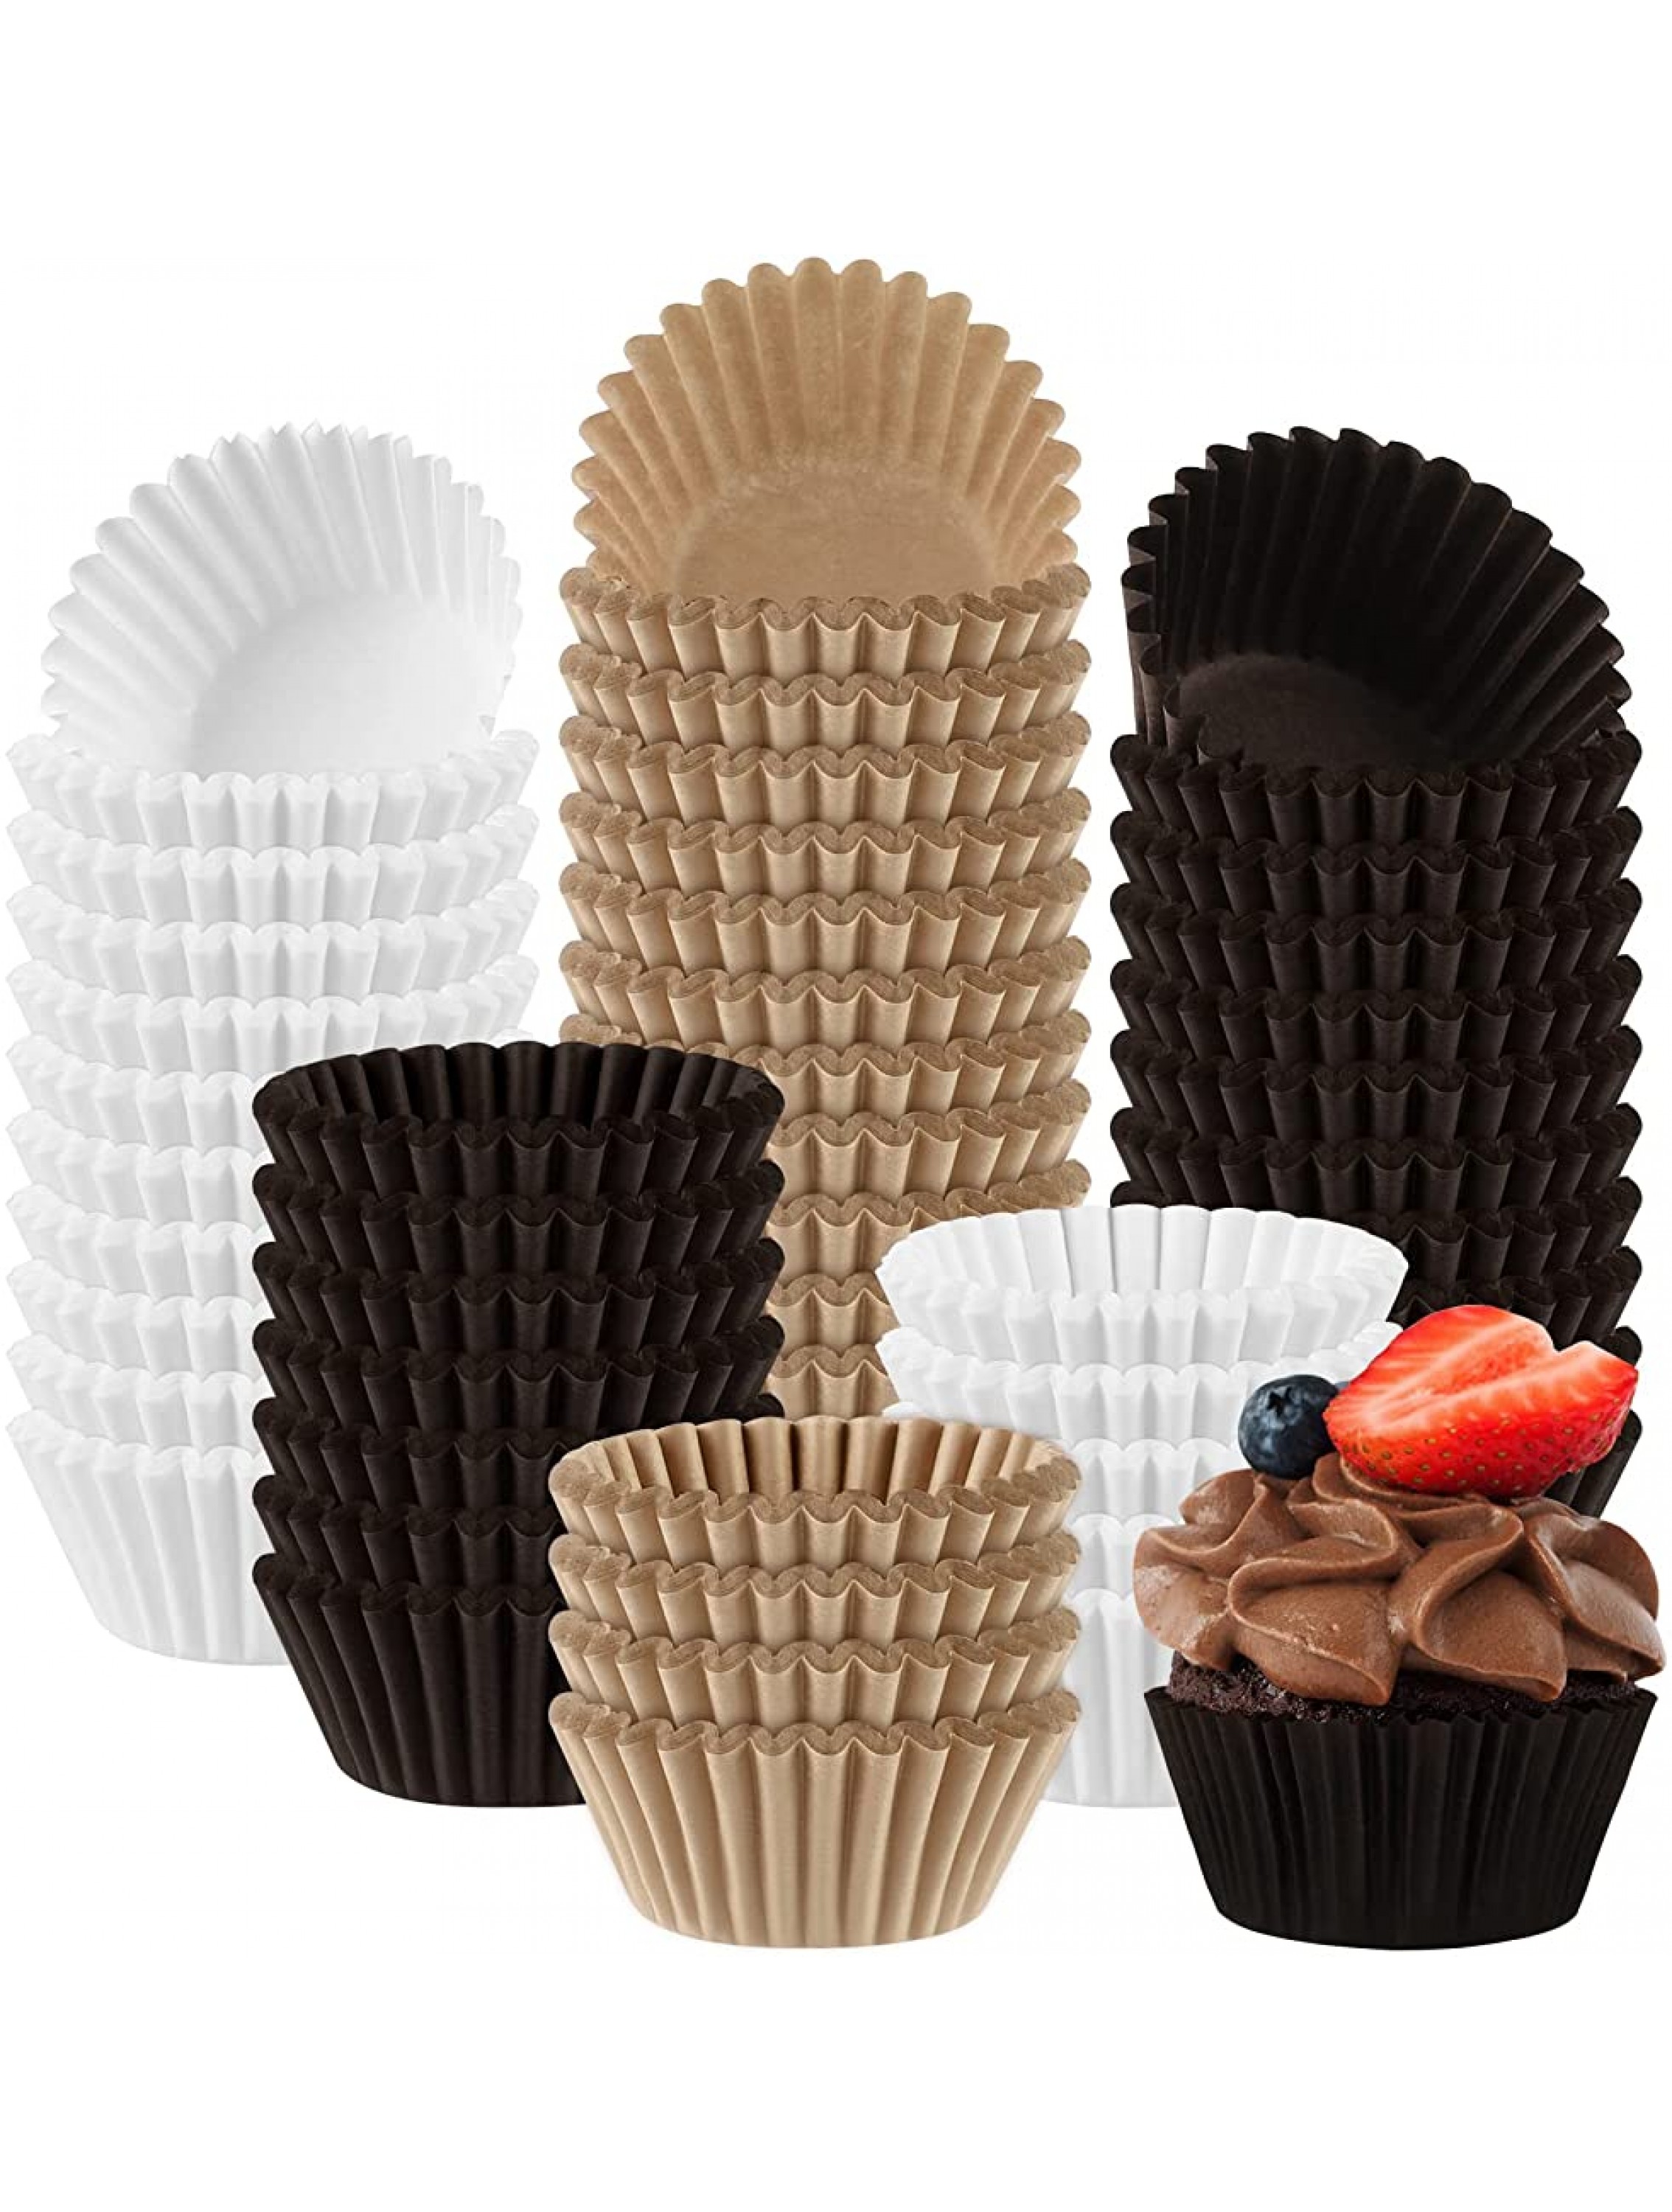 Ruisita 1200 Pieces Mini Cupcake Liners 1.25 Inch Paper Baking Cups Muffin Liners Cupcake Wrappers Creaseproof Muffin Cups for Weddings Birthdays Baby Showers Brown Natural White - BB9OYHUUN